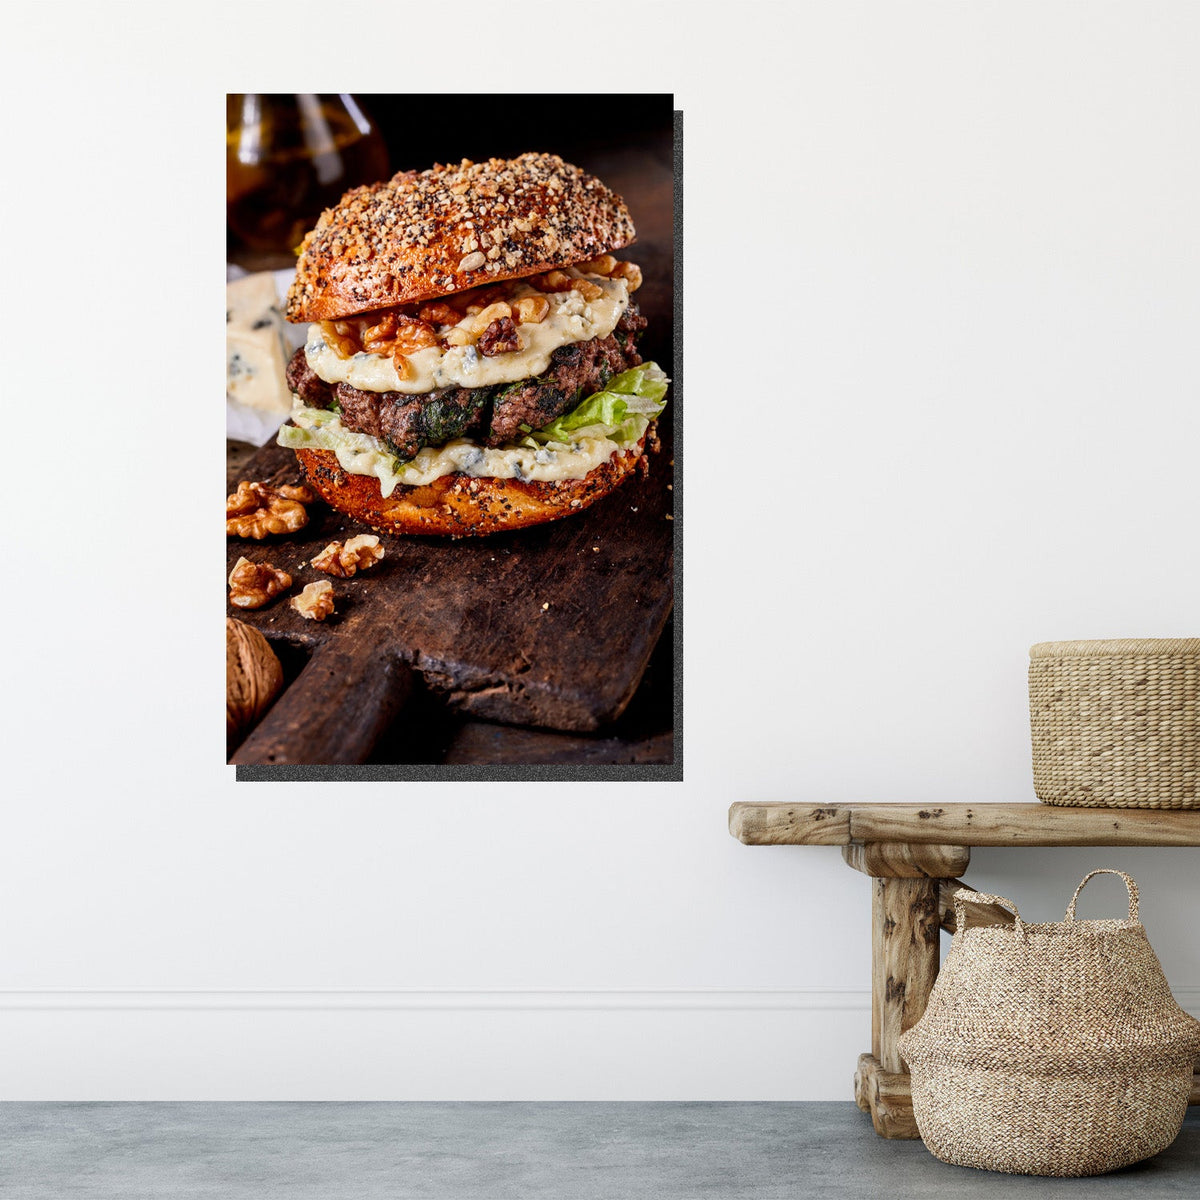 https://cdn.shopify.com/s/files/1/0387/9986/8044/products/GourmetBeefBurgerCanvasArtprintStretched-3.jpg